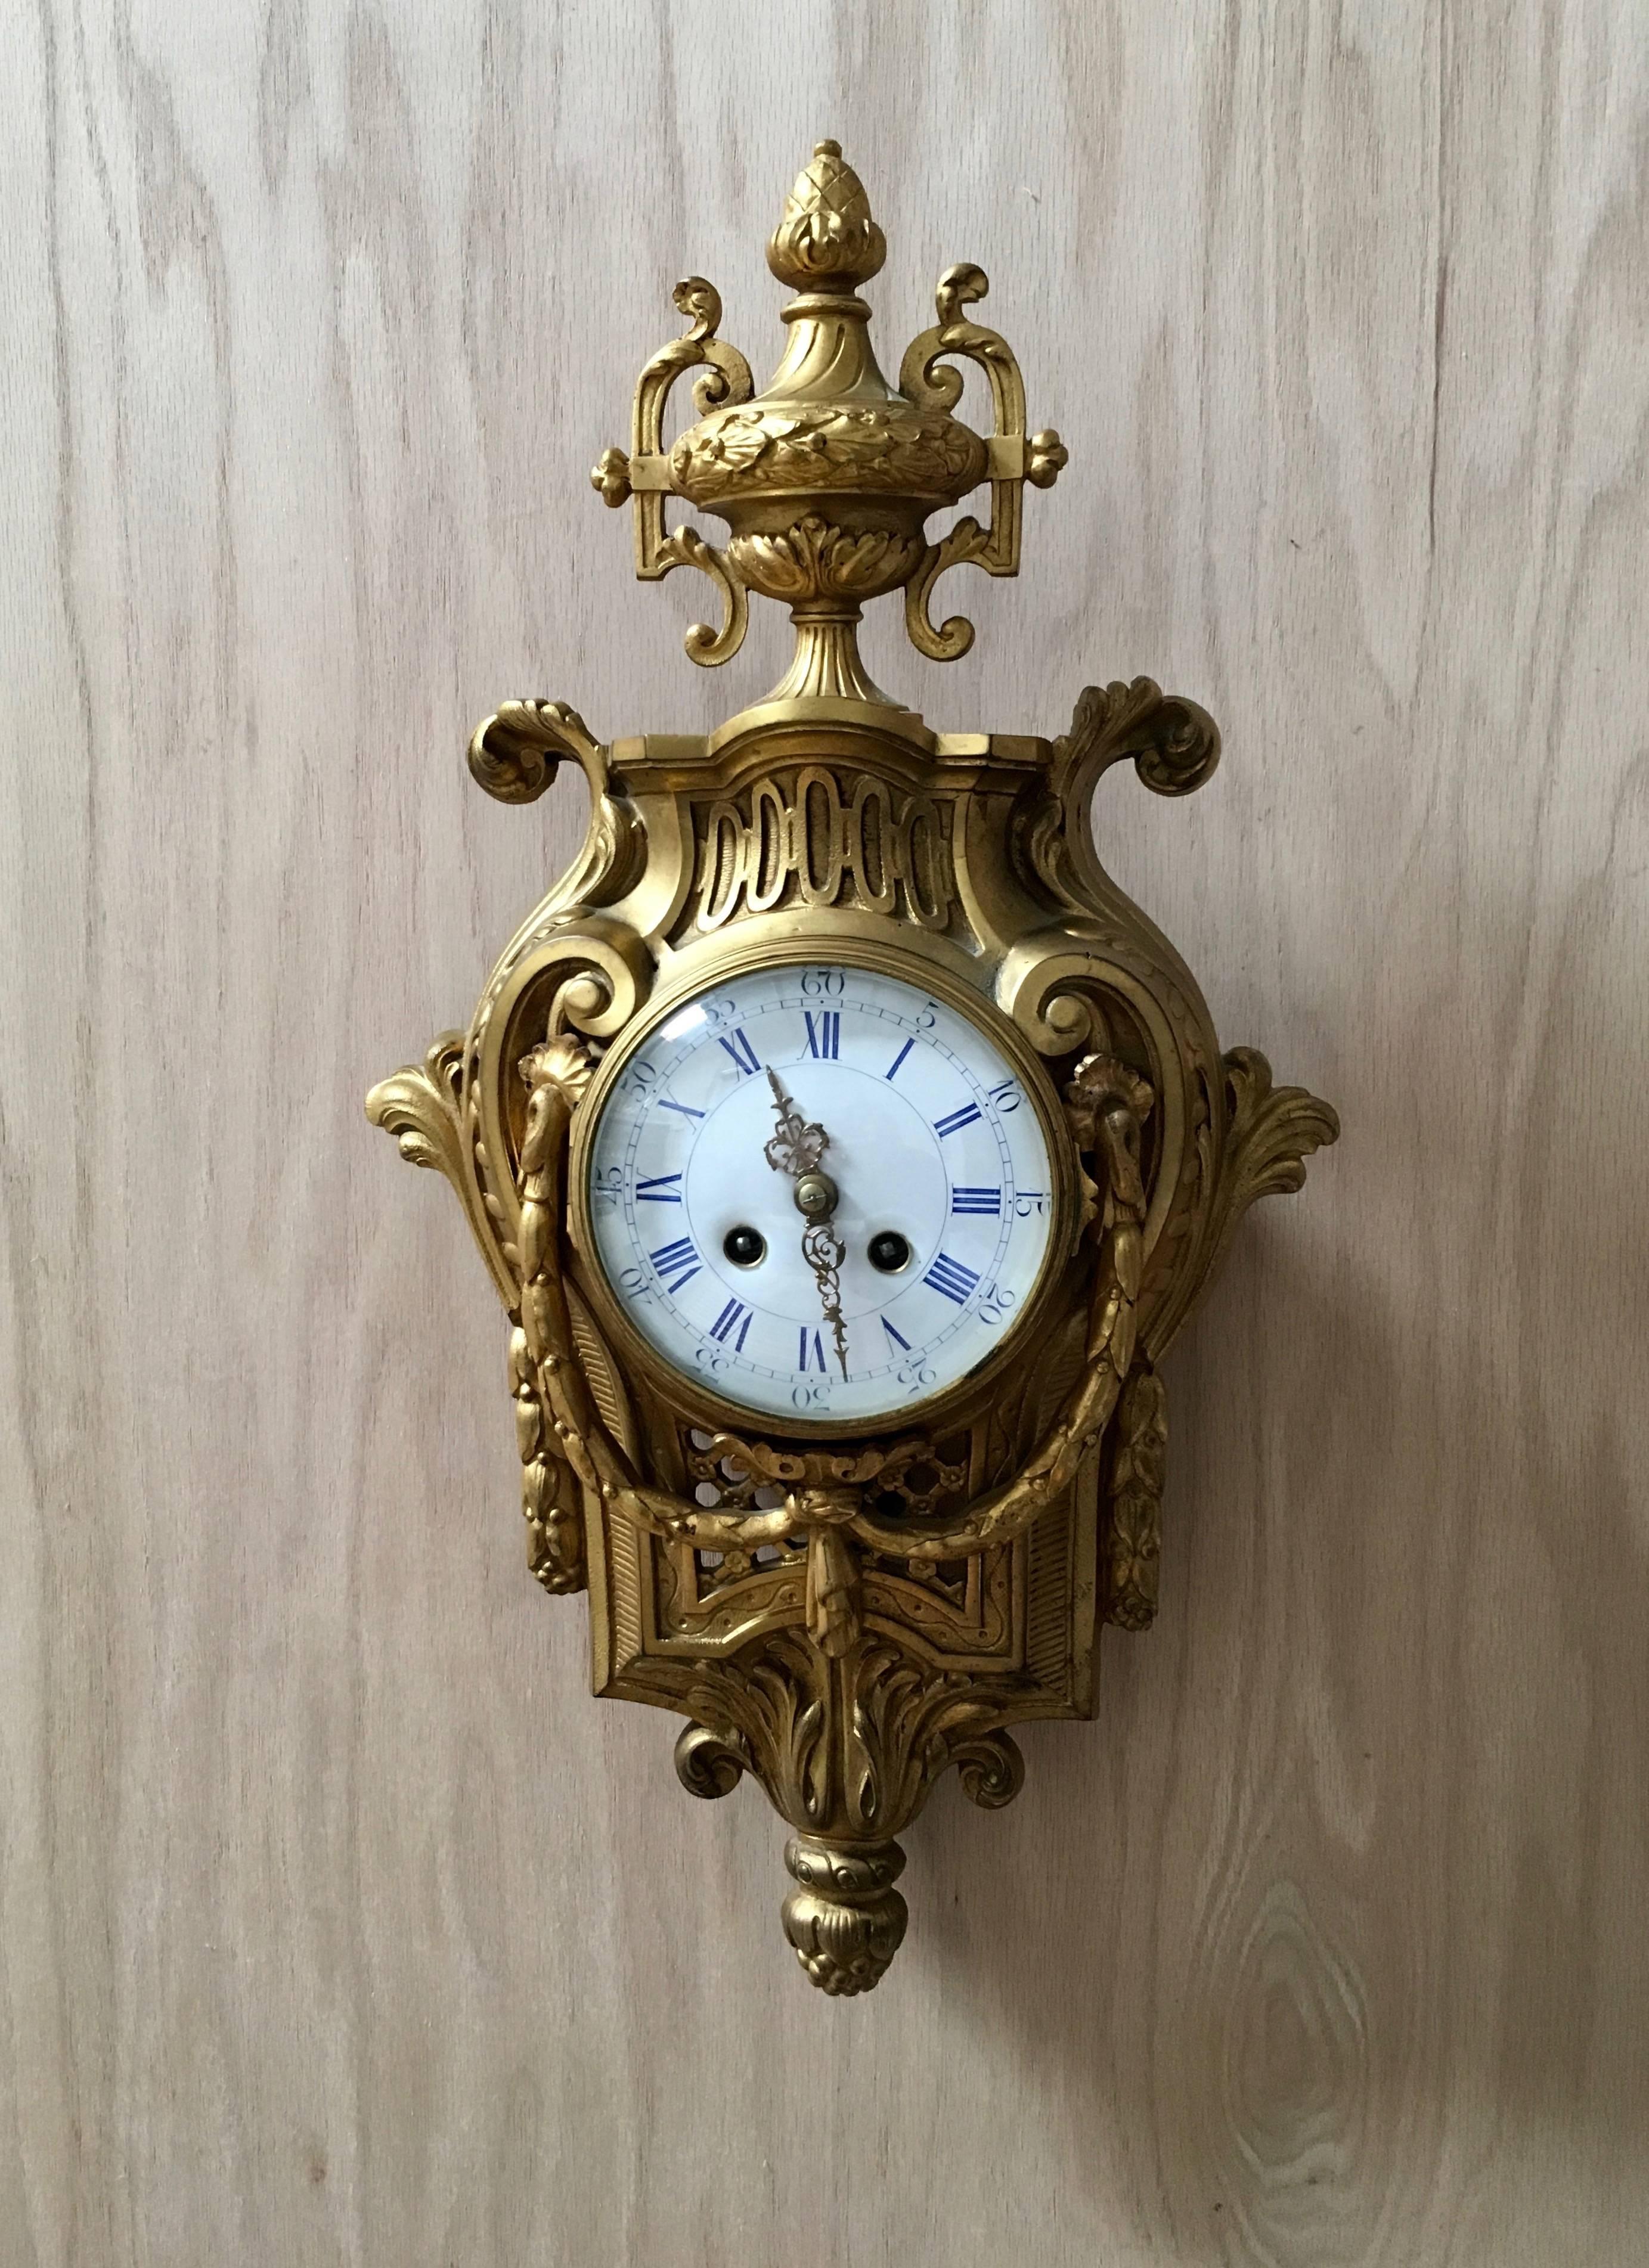 19th century bronze cartel clock with porcelain dial and 8 day time and strike movement in good running condition.